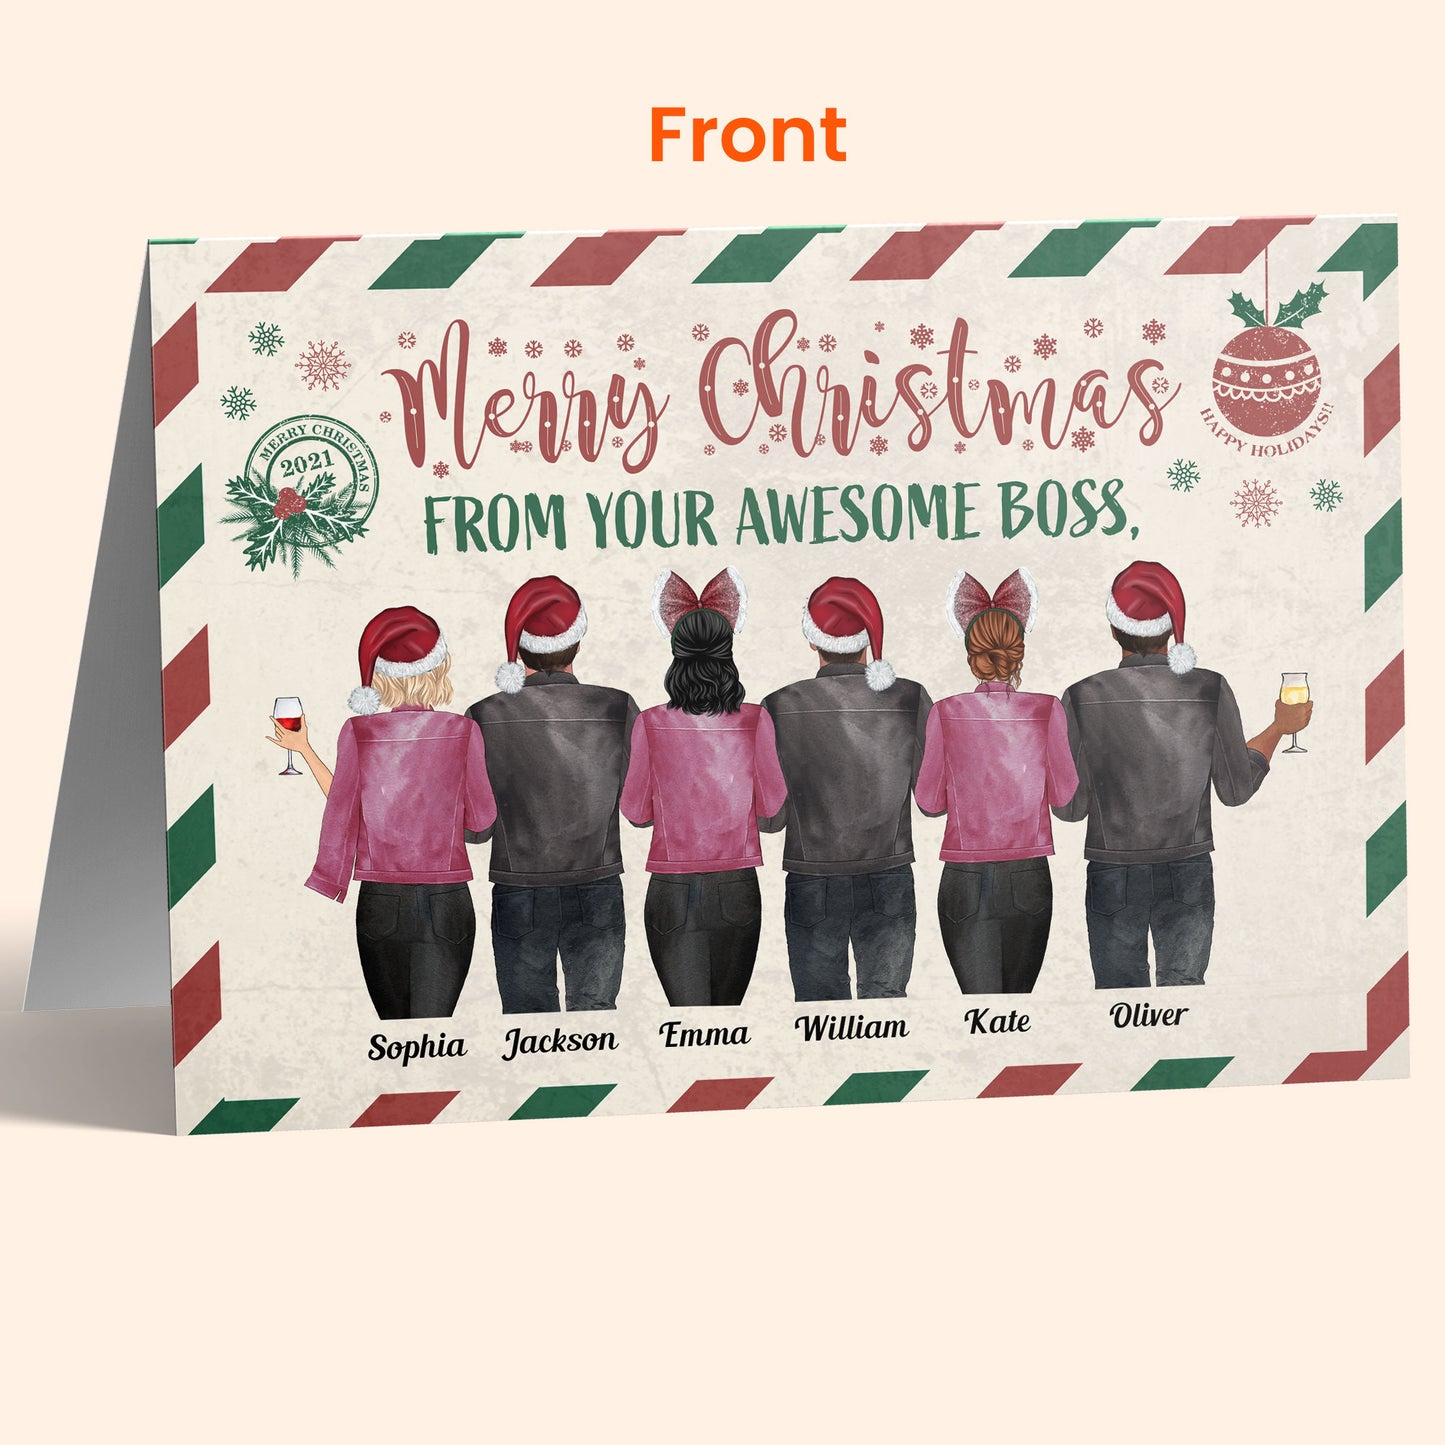 From Your Greatest Colleague - Personalized Folded Card - Christmas Gift For Work Besties